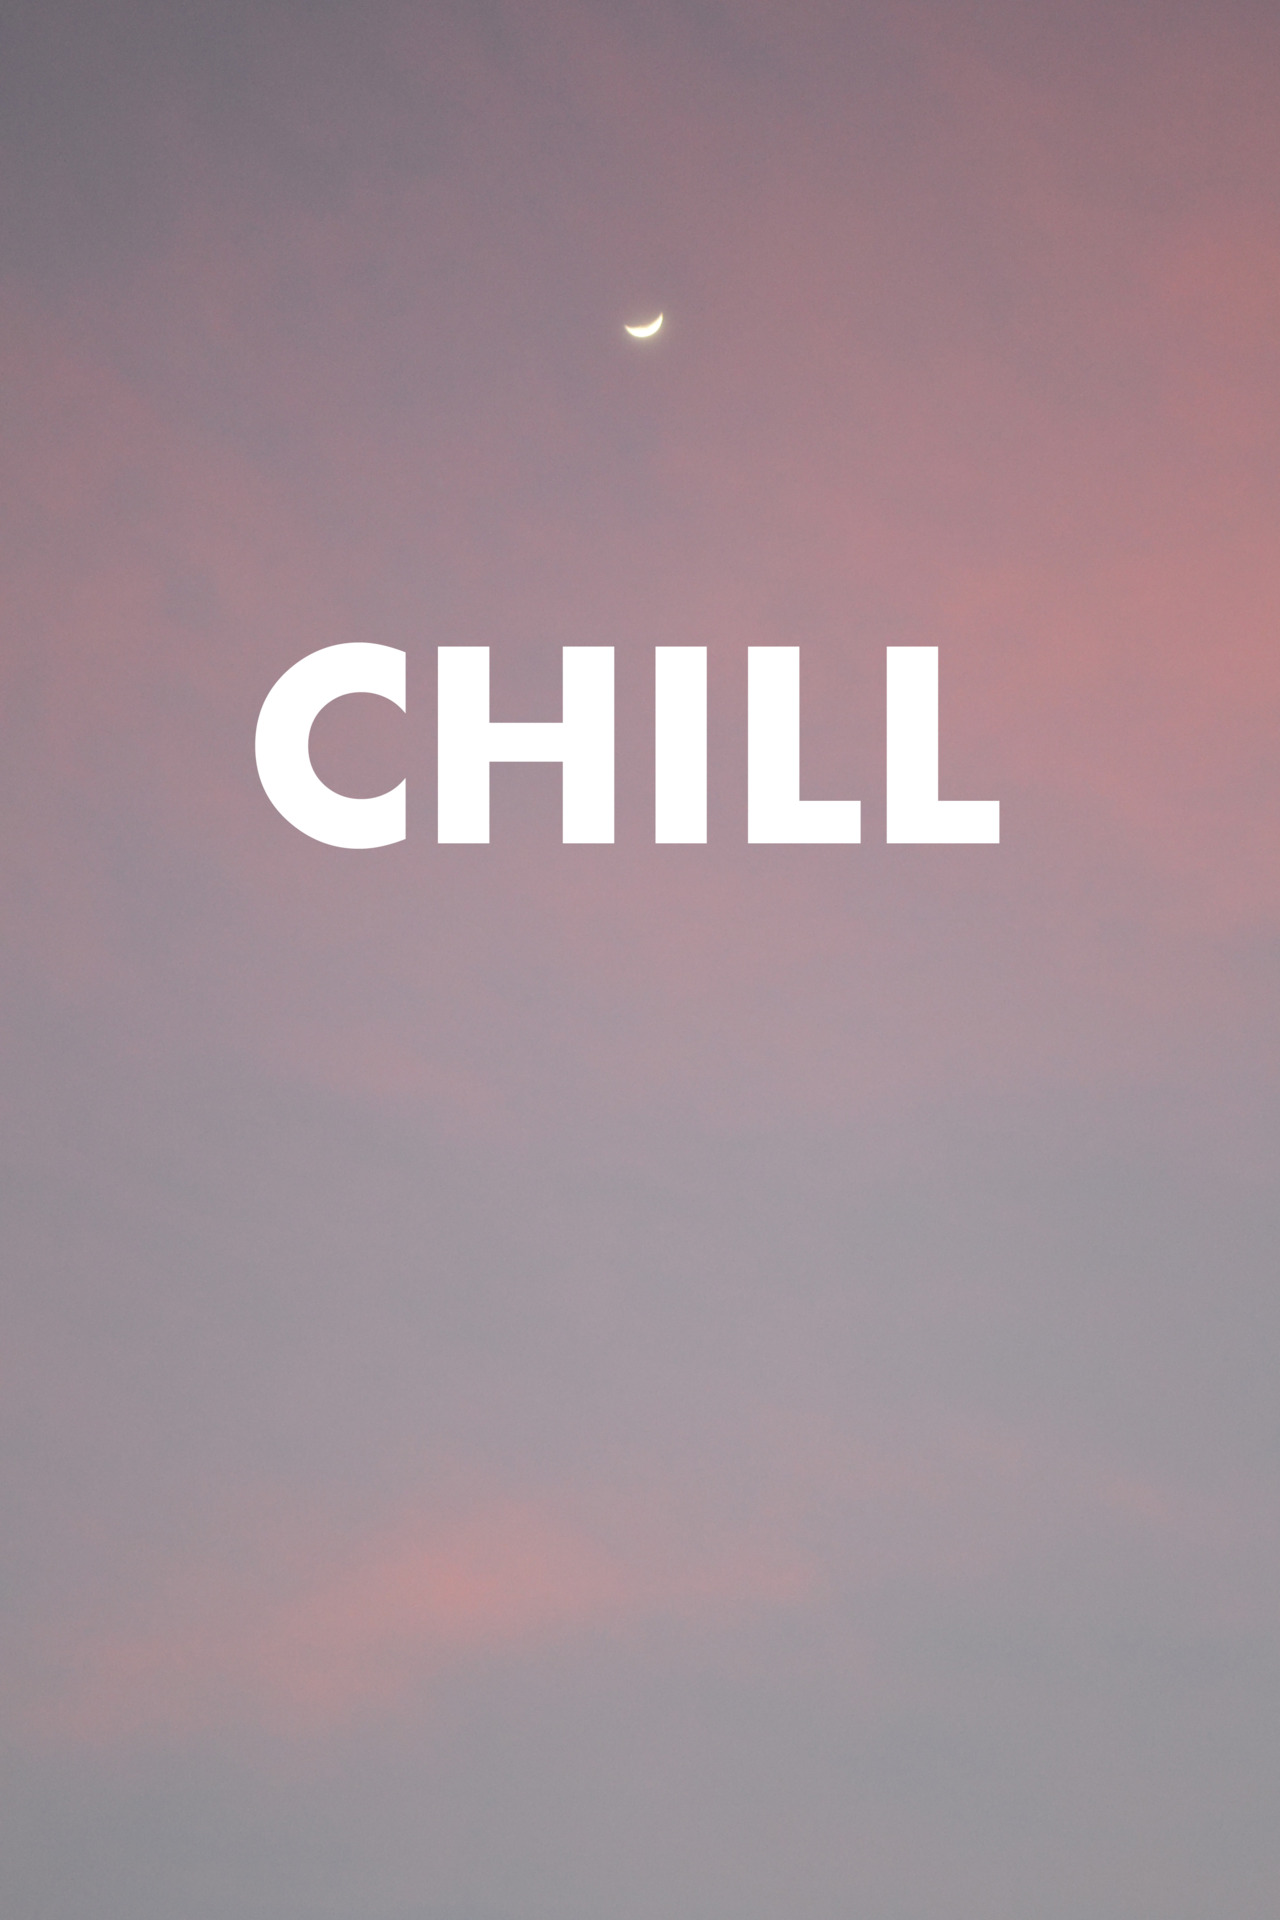 Chill, Moon, And Quote Image Chill And Enjoy Life